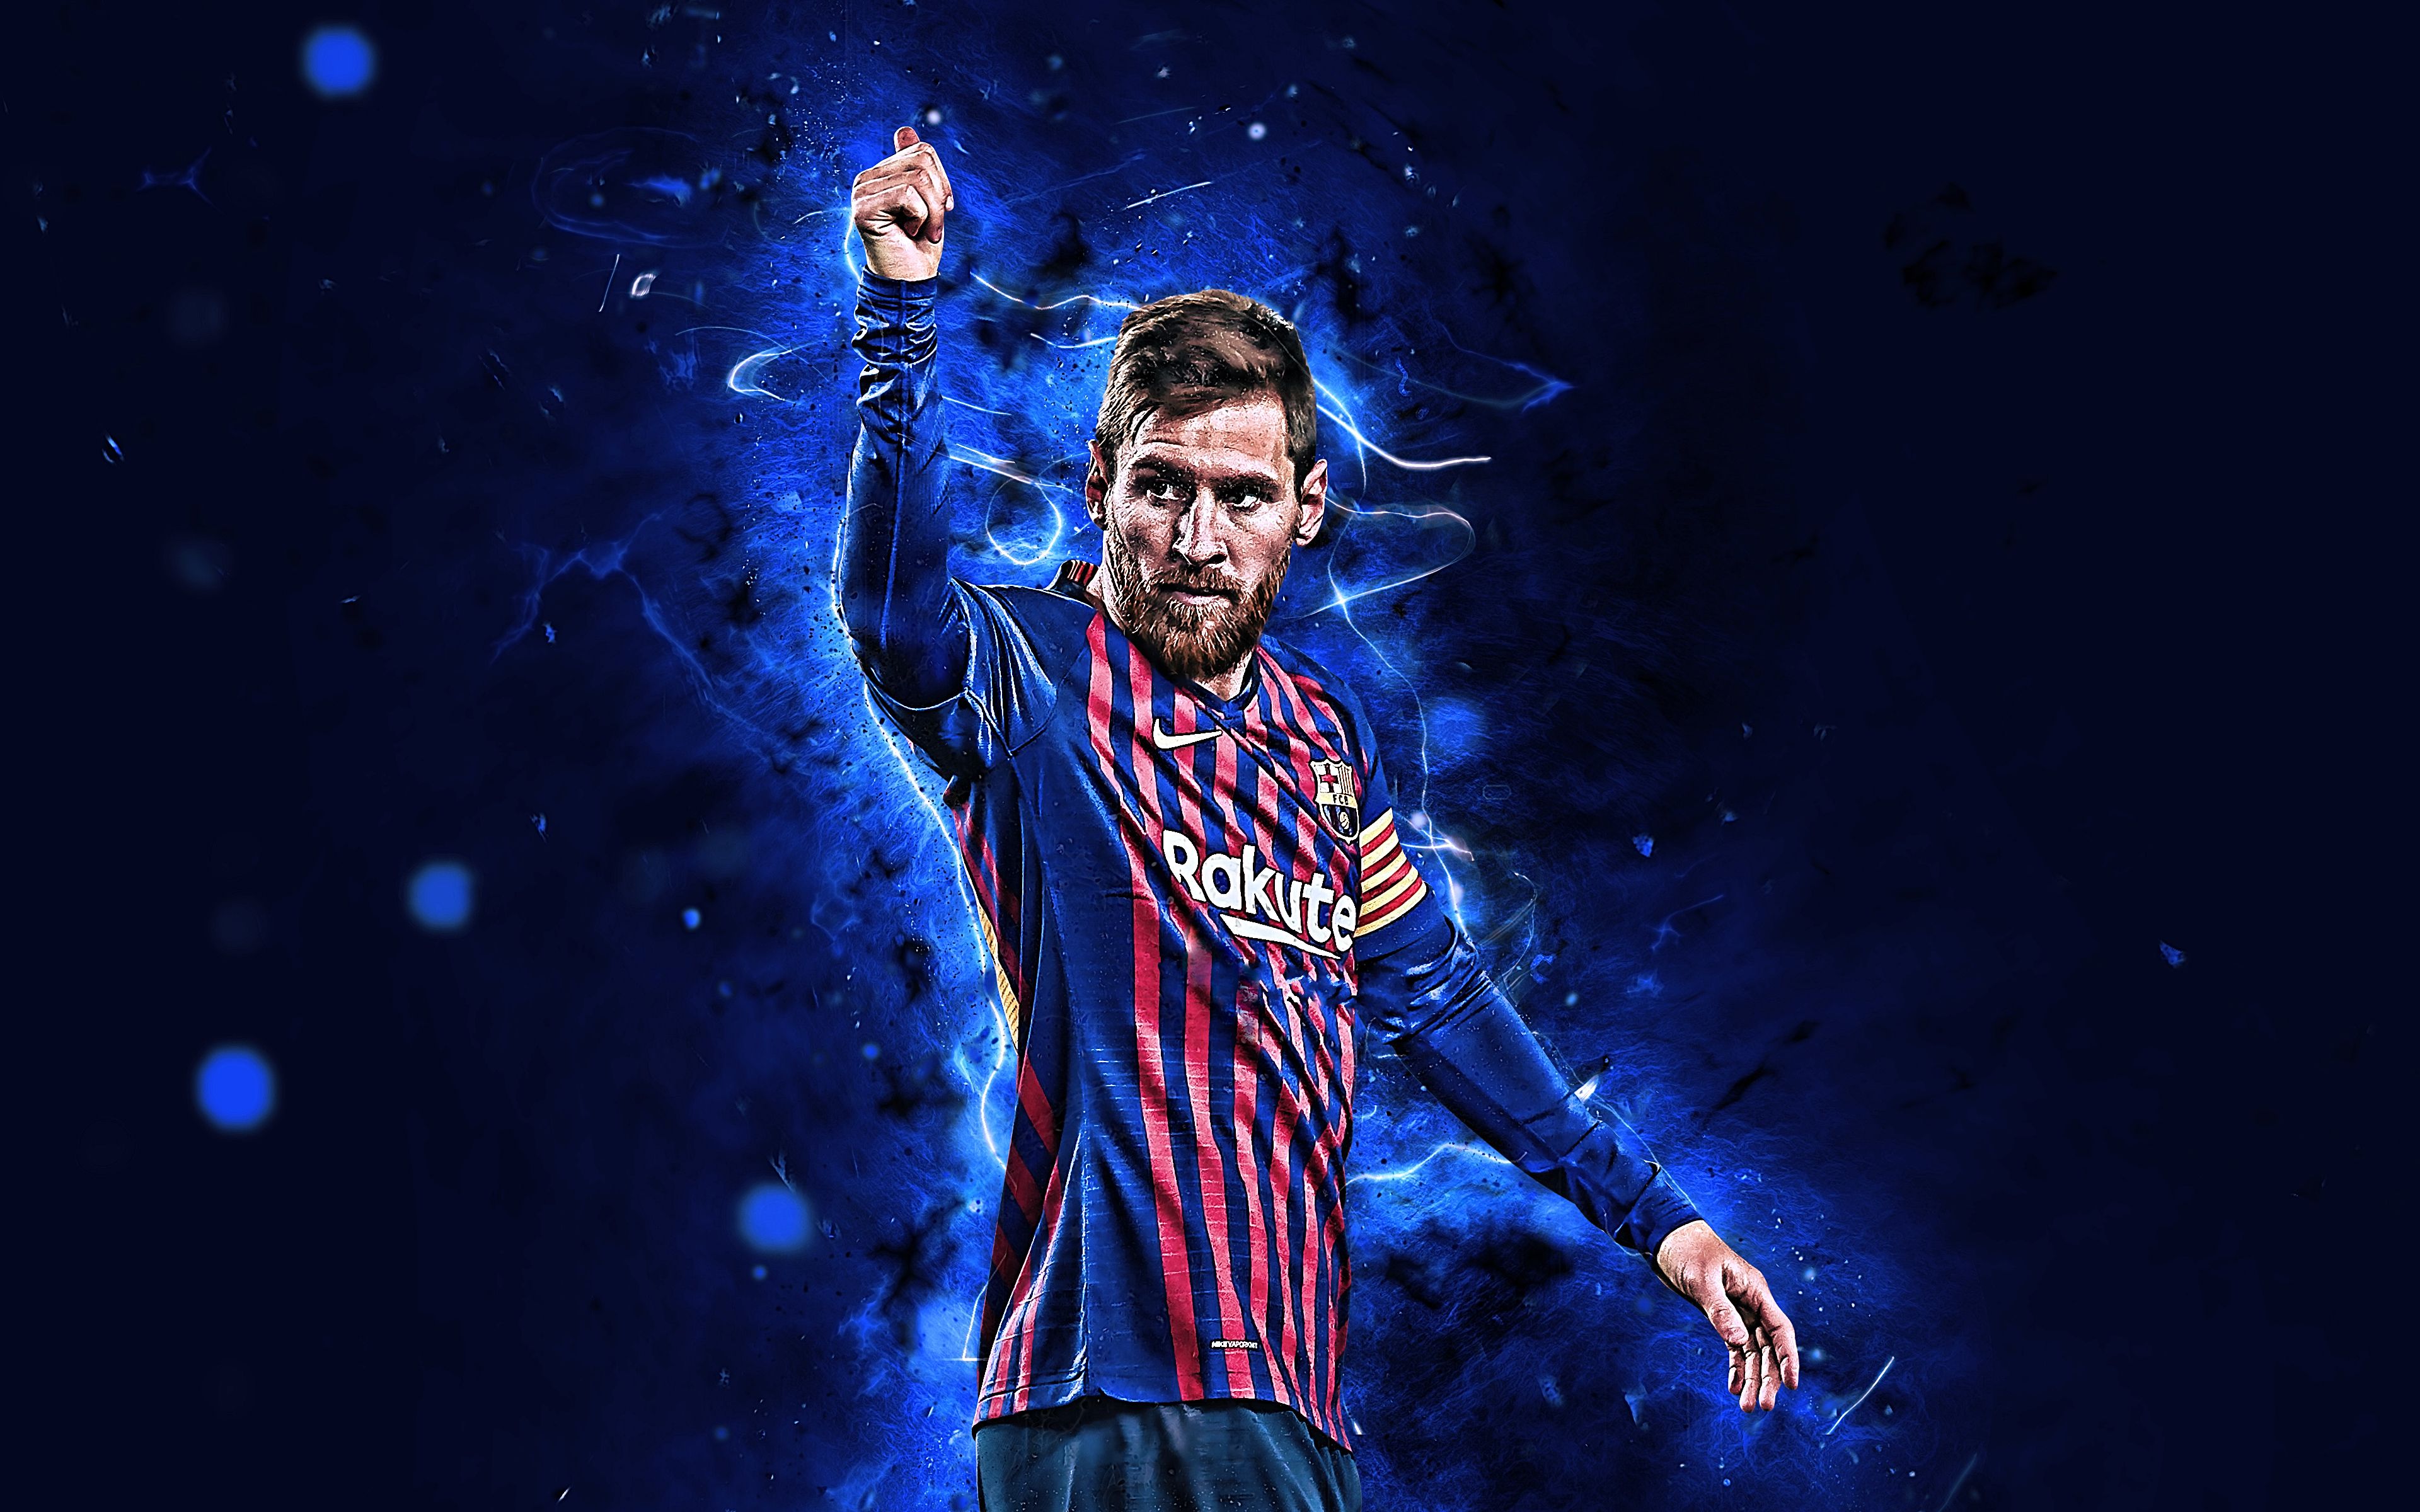 Free download Lionel Messi 4k Ultra HD Wallpaper Background Image 3840x2400 [3840x2400] for your Desktop, Mobile & Tablet. Explore Messi 2020 4k Mobile Wallpaper. Messi 2020 4k Mobile Wallpaper